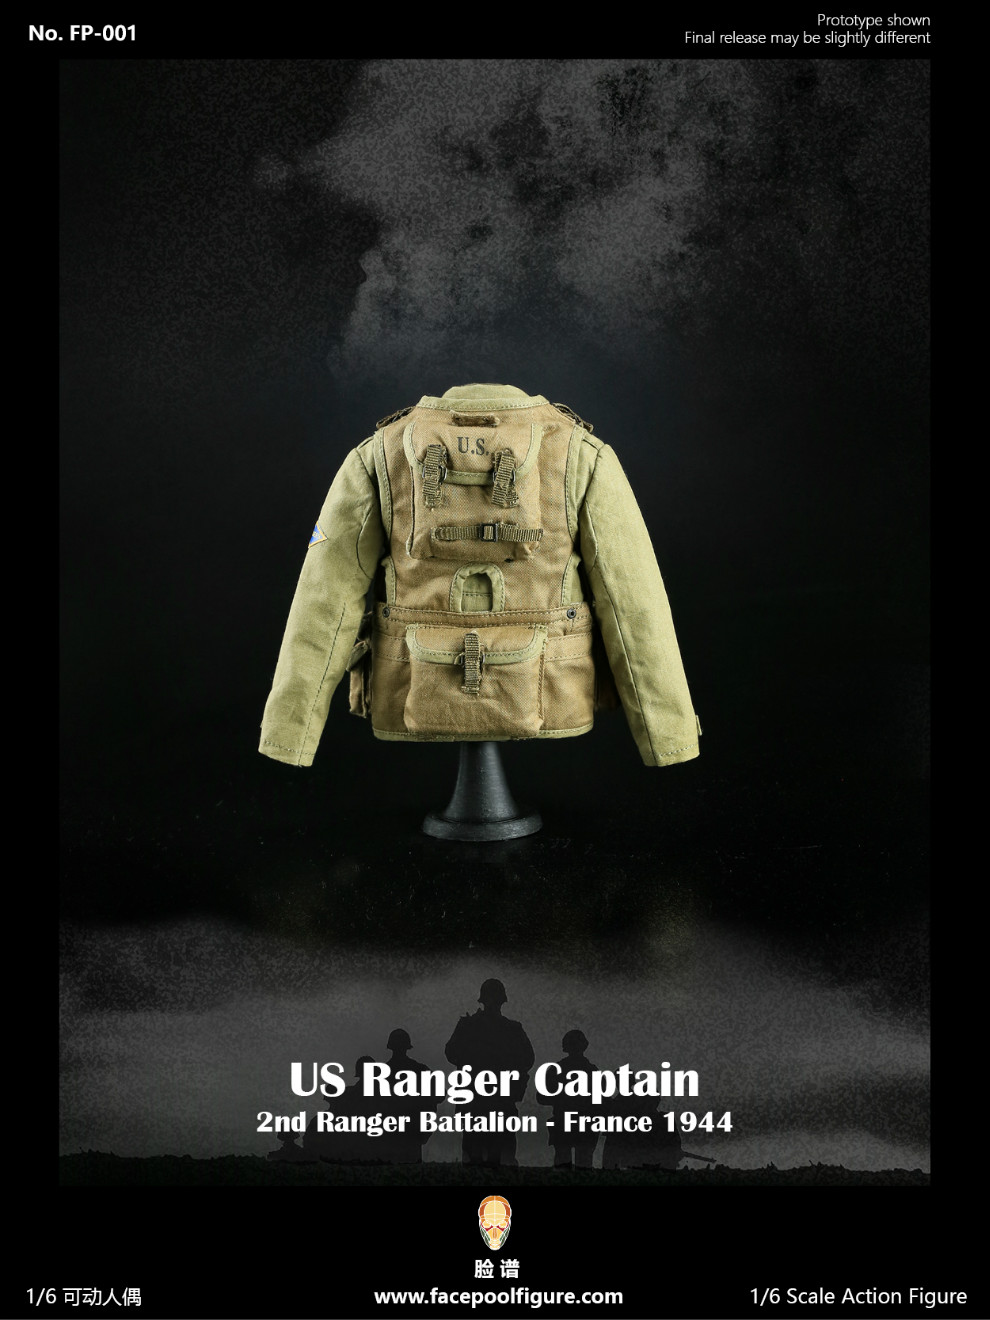 male - NEW PRODUCT: update notice Facepool: 1/6 WWII US RANGER CAPTAIN World War II US Rangers Captain - Anniversary 23224211